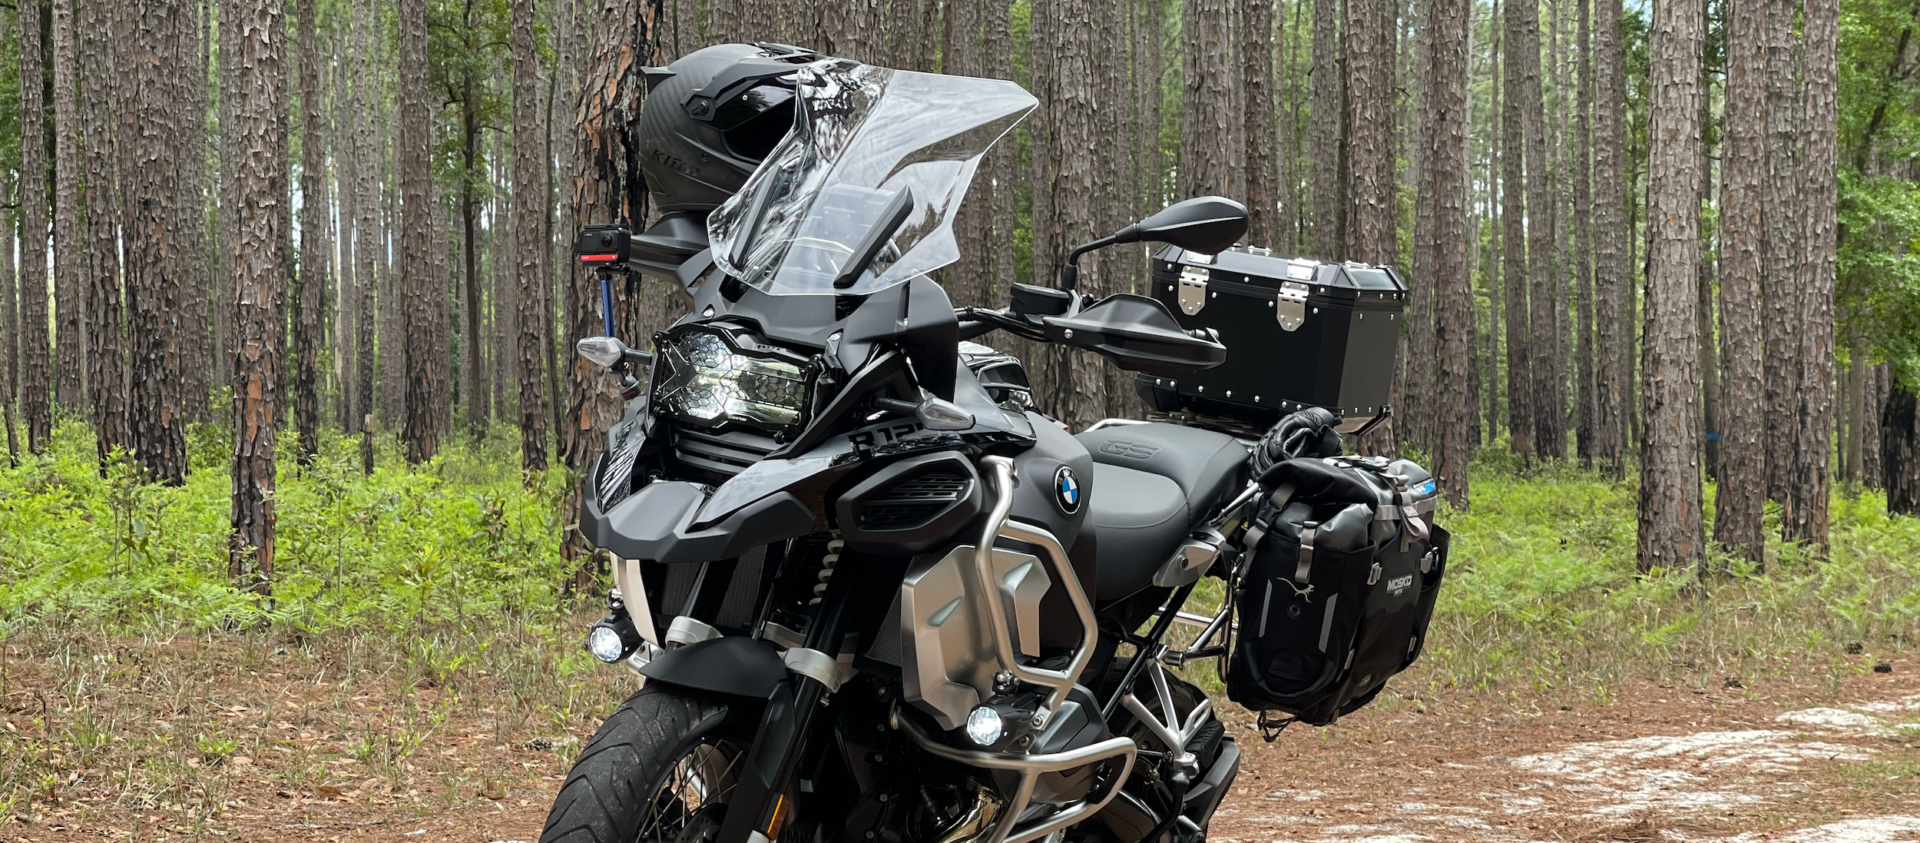 2021 BMW R1250GS Adventure Triple Black with a forest background